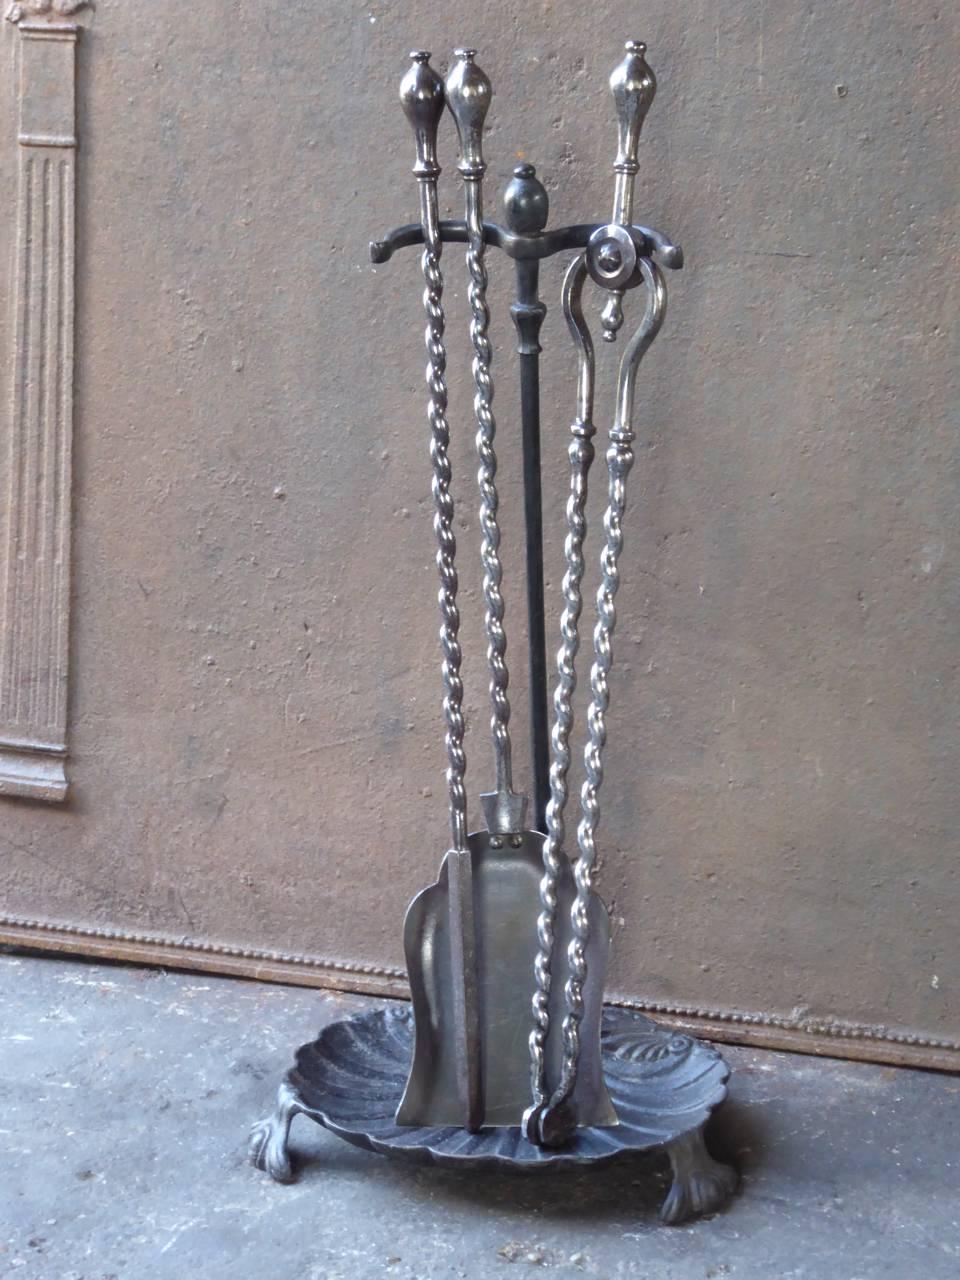 19th century English fireplace tool set, fire irons made of polished steel, wrought iron and cast iron.

We have a unique and specialized collection of antique and used fireplace accessories consisting of more than 1000 listings at 1stdibs. Amongst